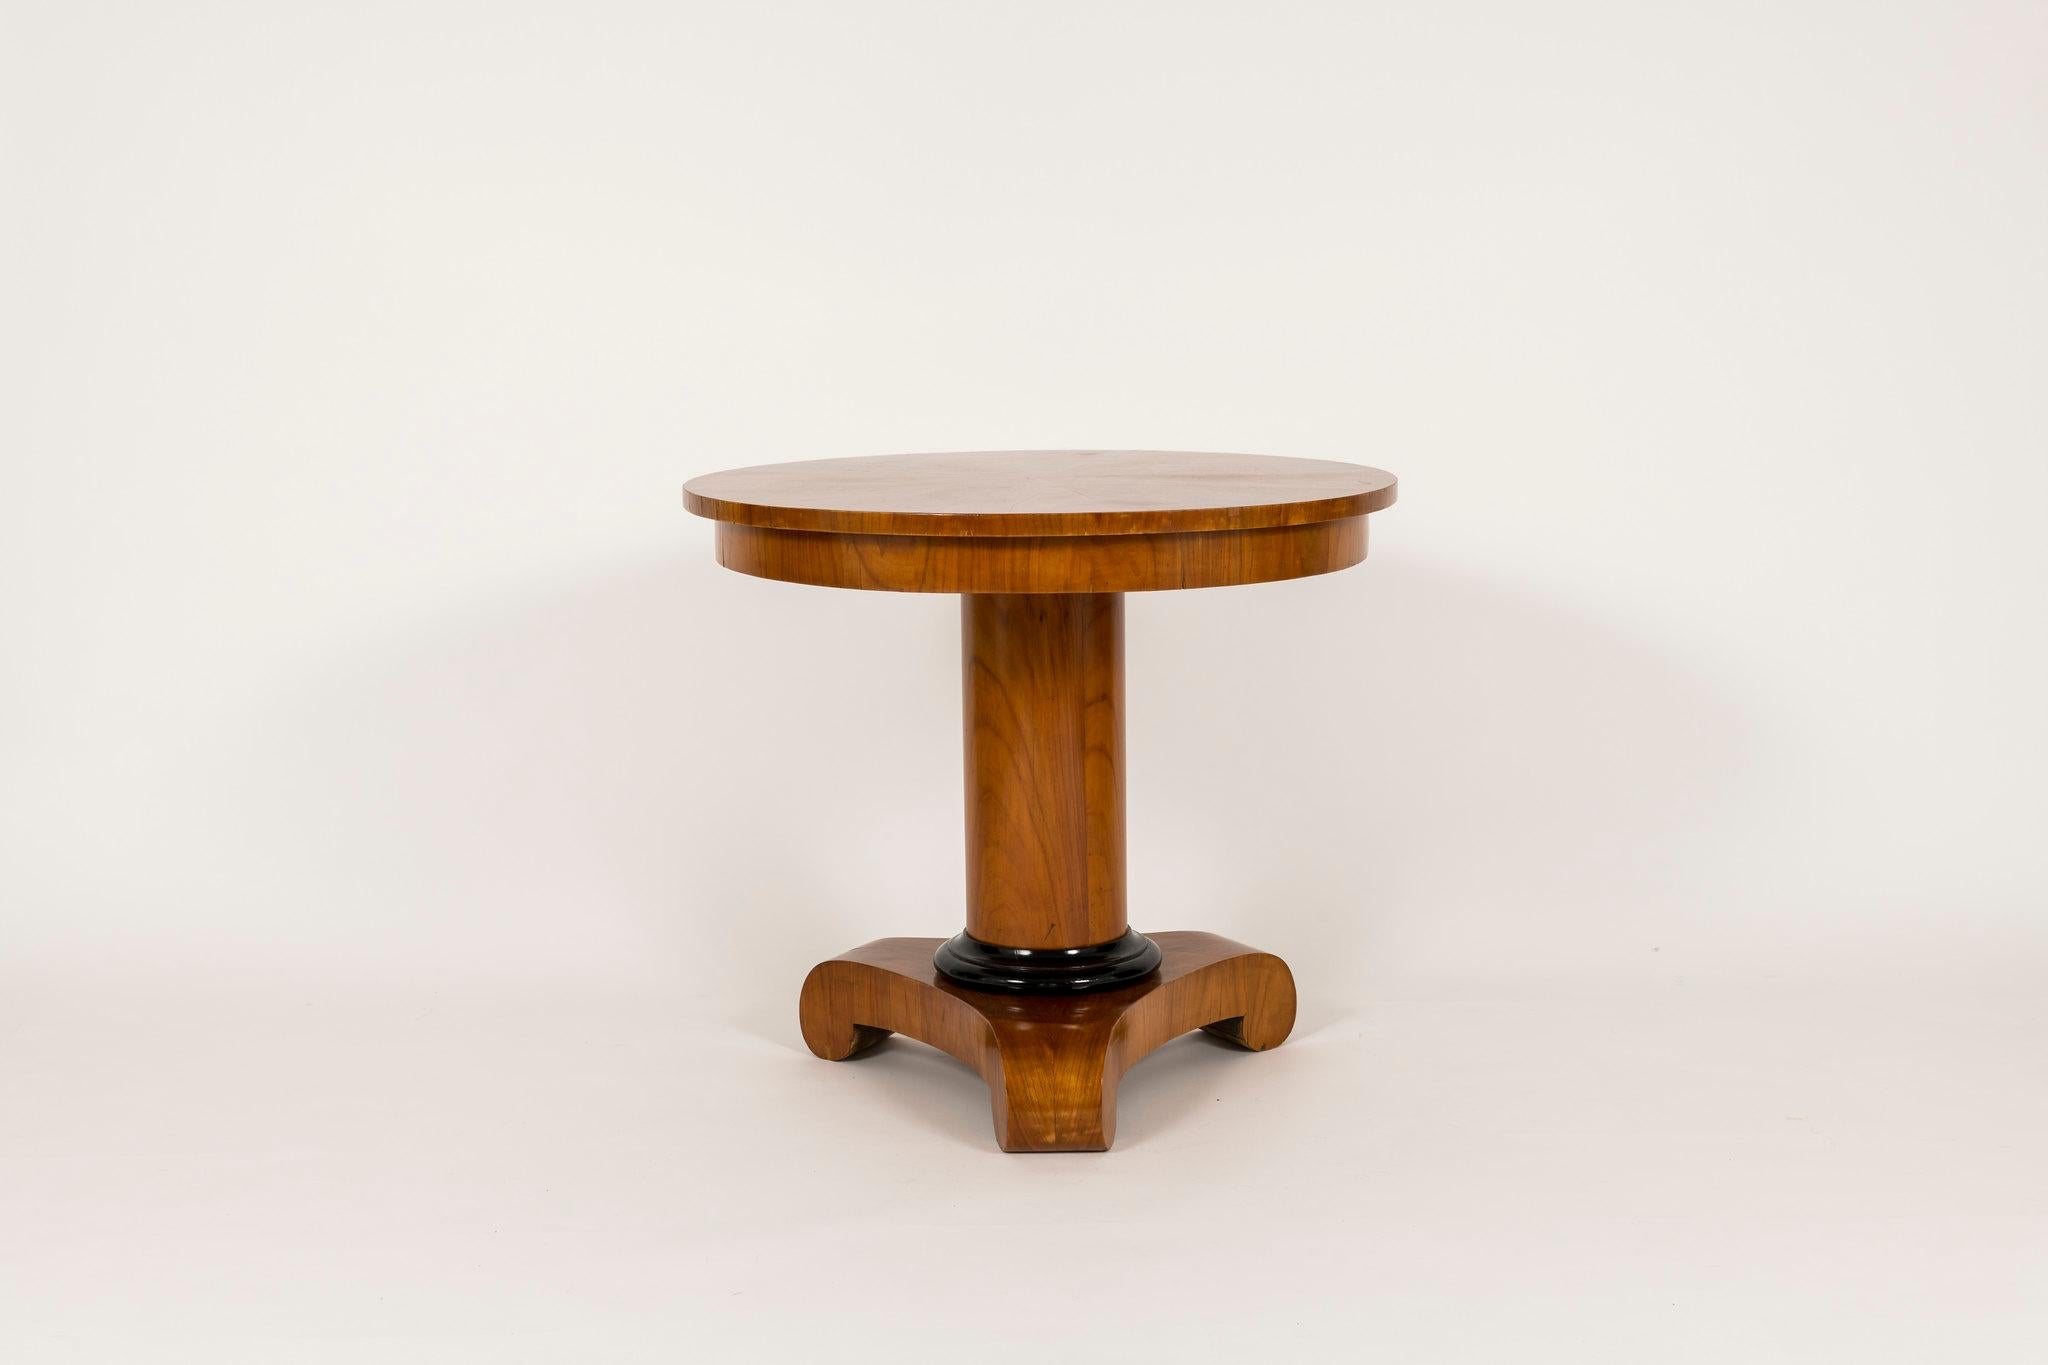 A very handsome period Biedermeier center table with pedestal having an ebonized maple detail at base. This is a graciously scaled and can be an end, center or side table.